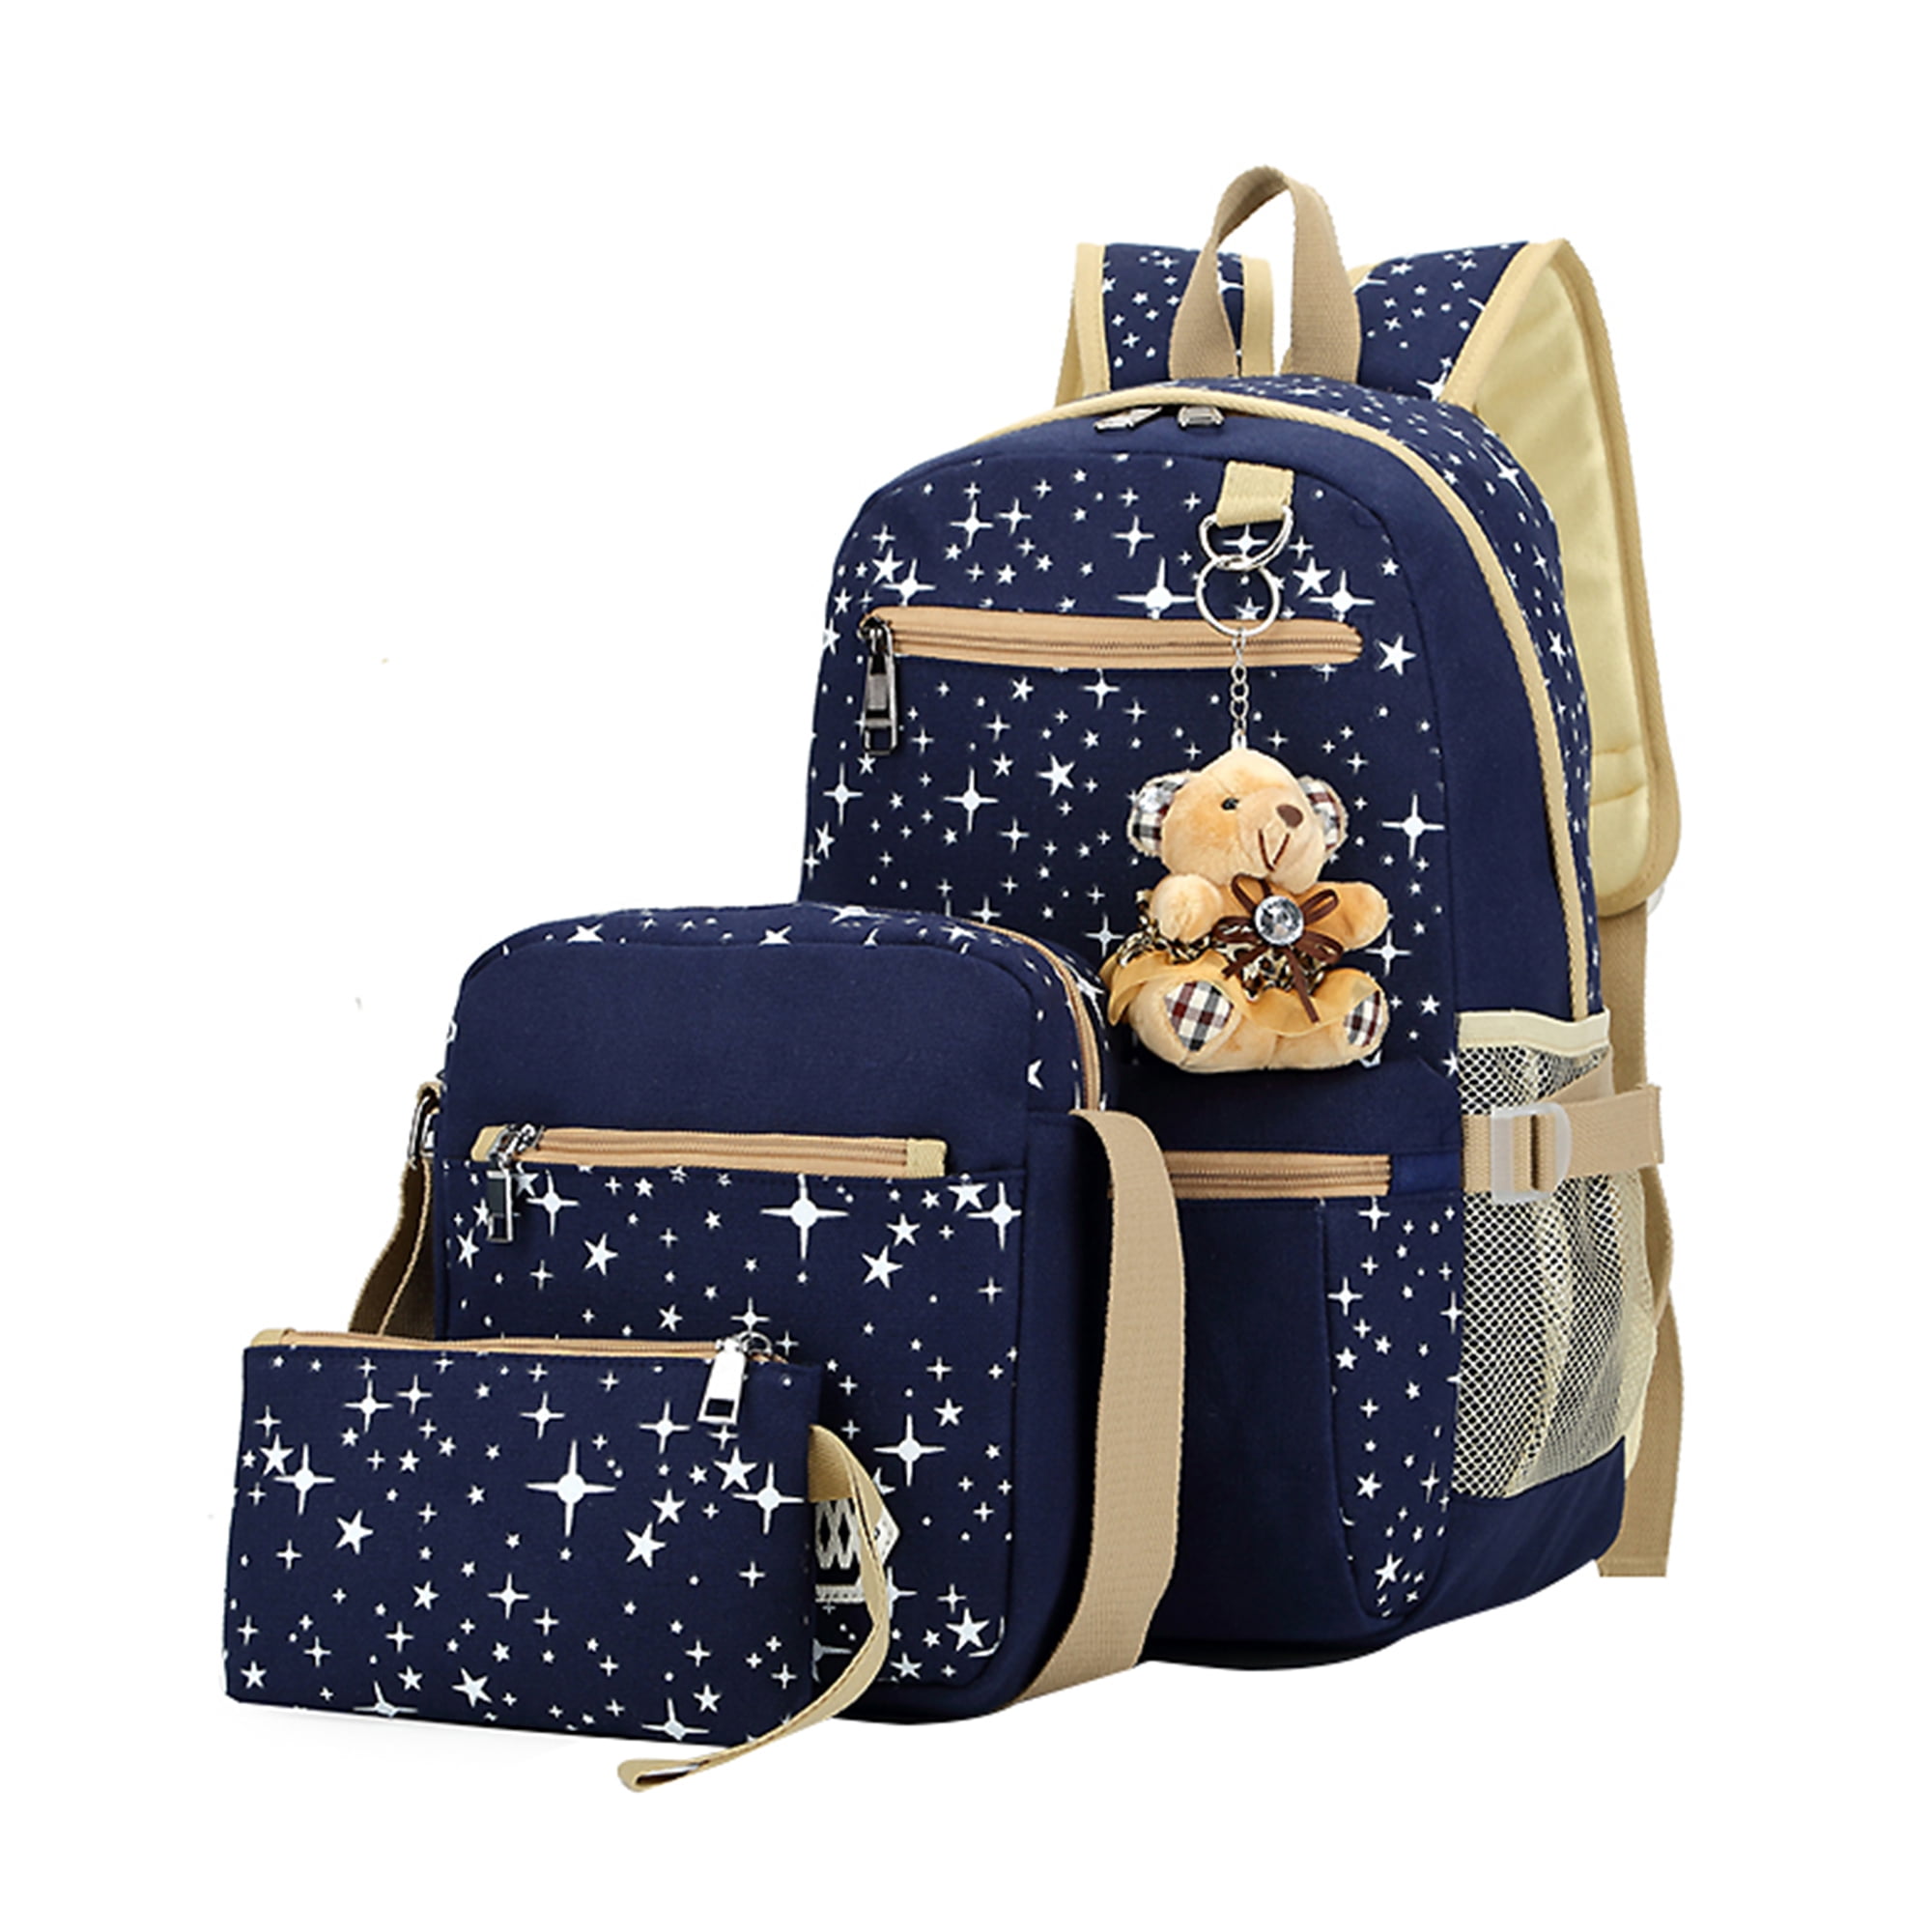 Lowestbest - School Backpack for Teens Clearance! Navy Blue 3Pcs/Sets